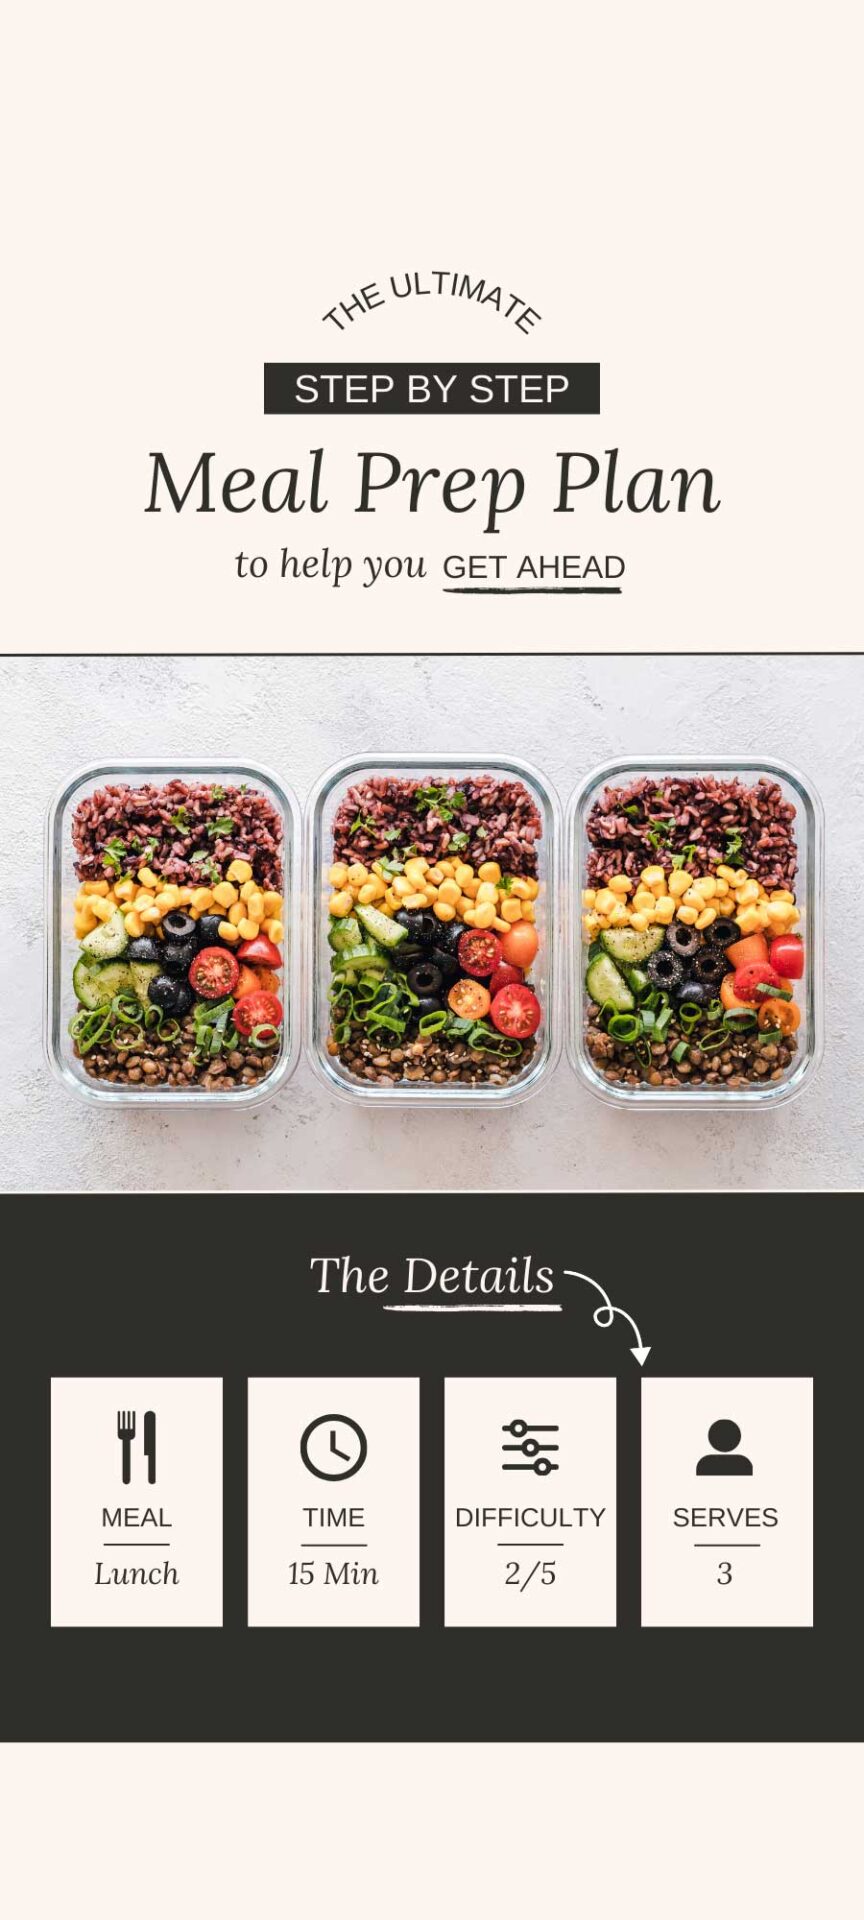 free meal plan template